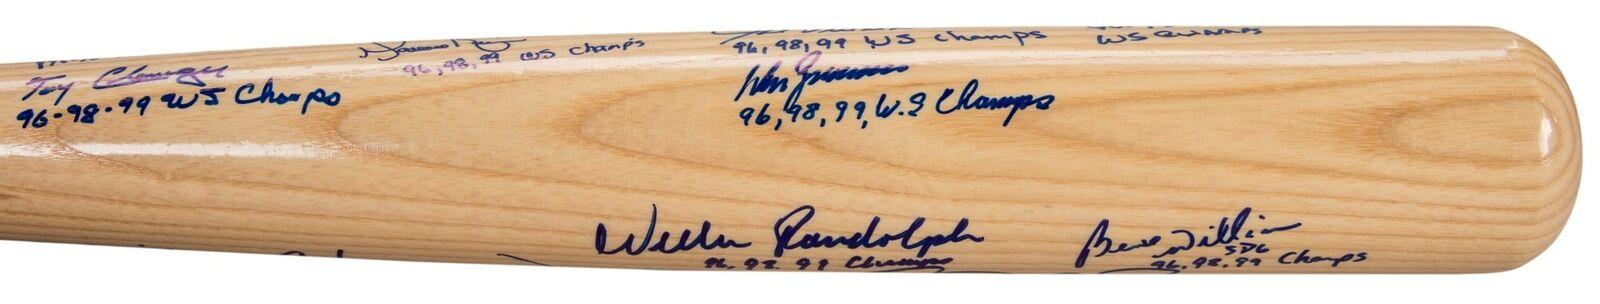 Extraordinary New York Yankees 1996 Team Of The Decade Signed Bat LE #21/25 JSA